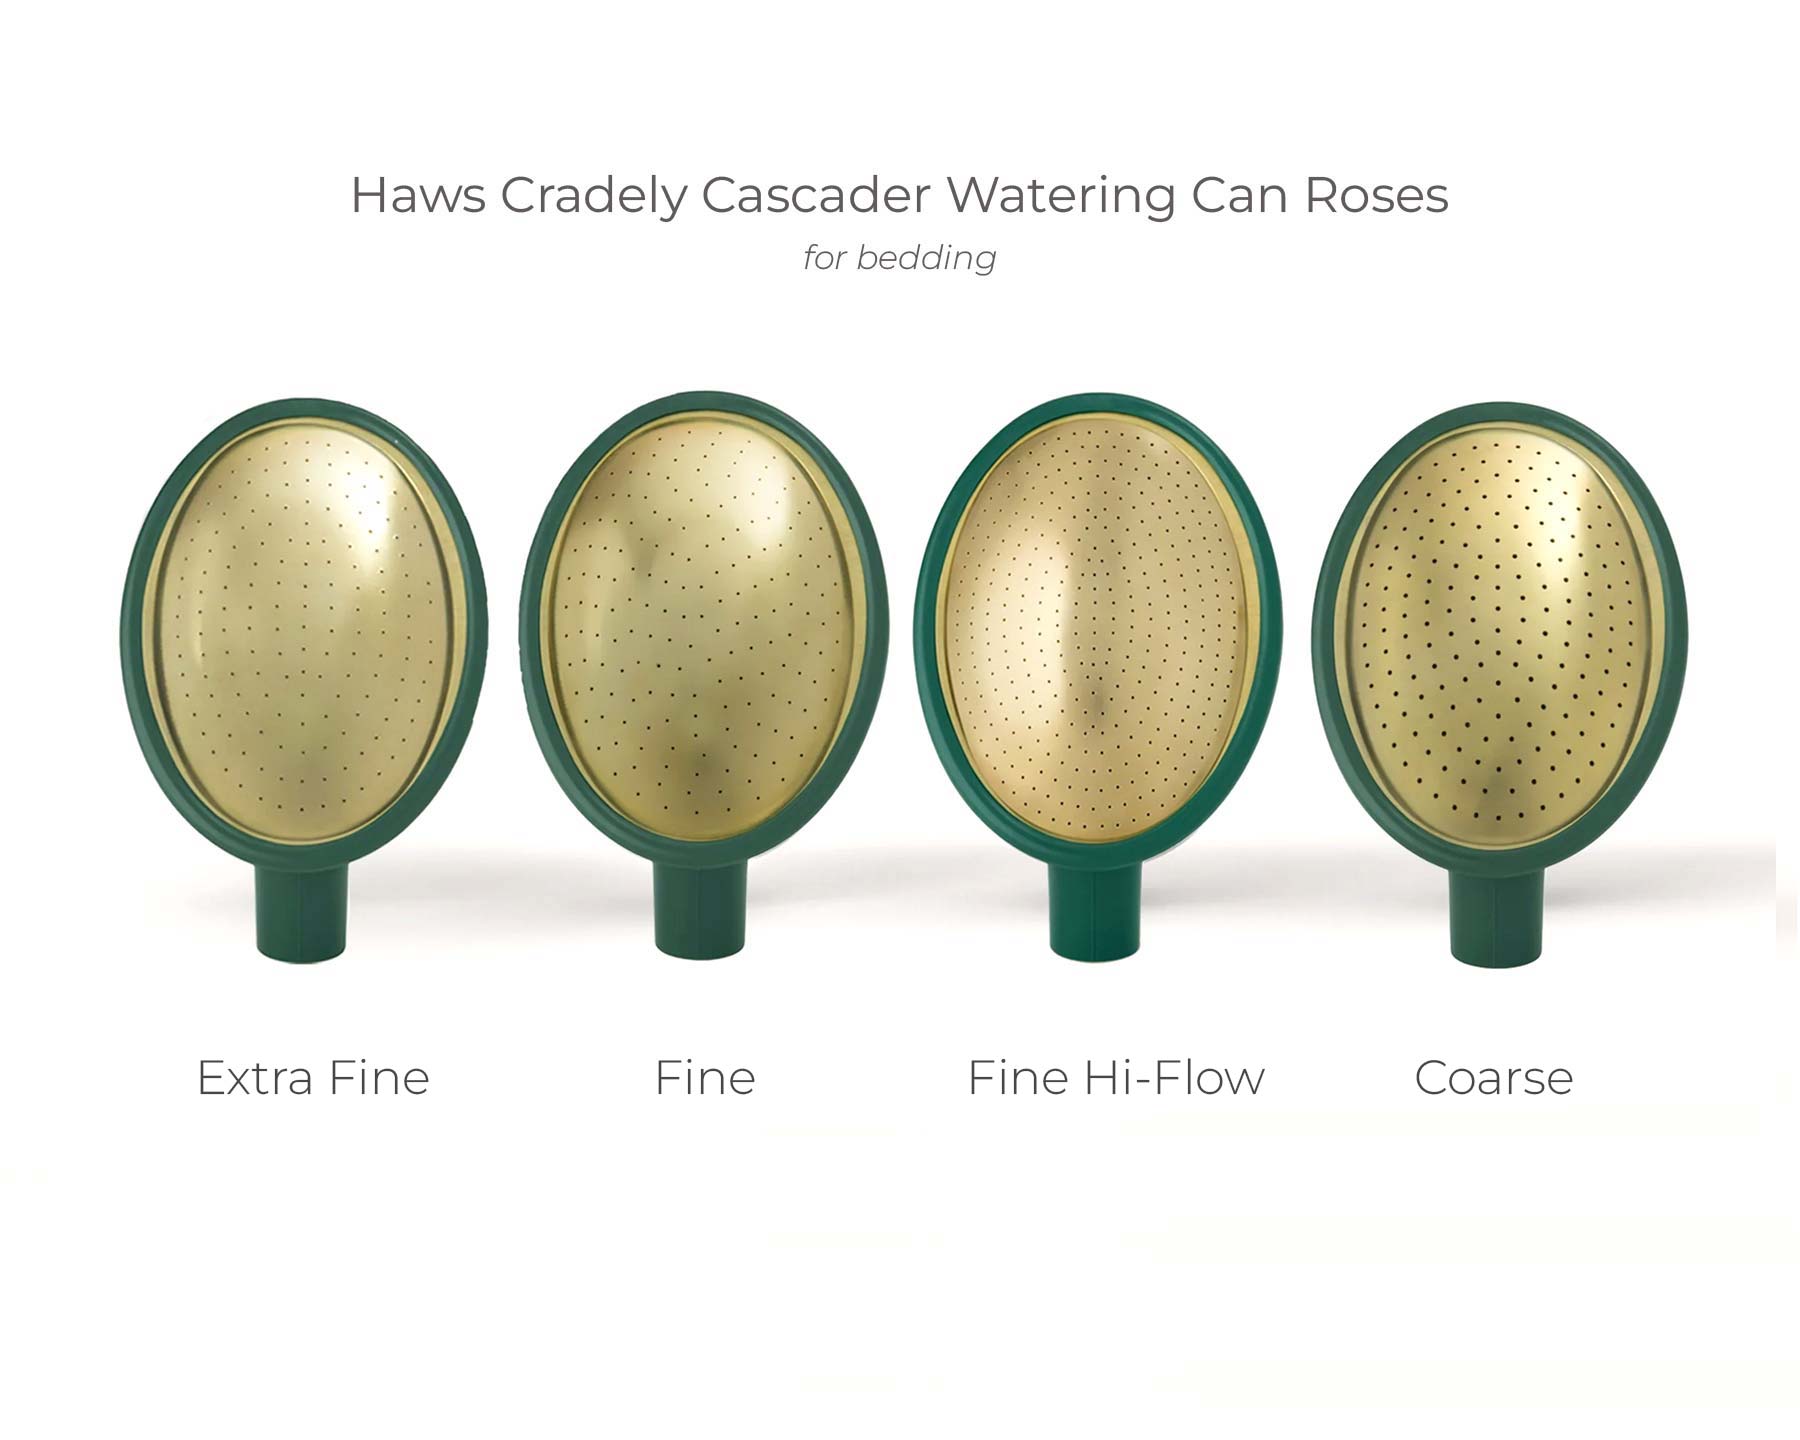 Brass Roses for the Cradley Cascader watering can by Haws of UK.  Suited best for bedding watering.